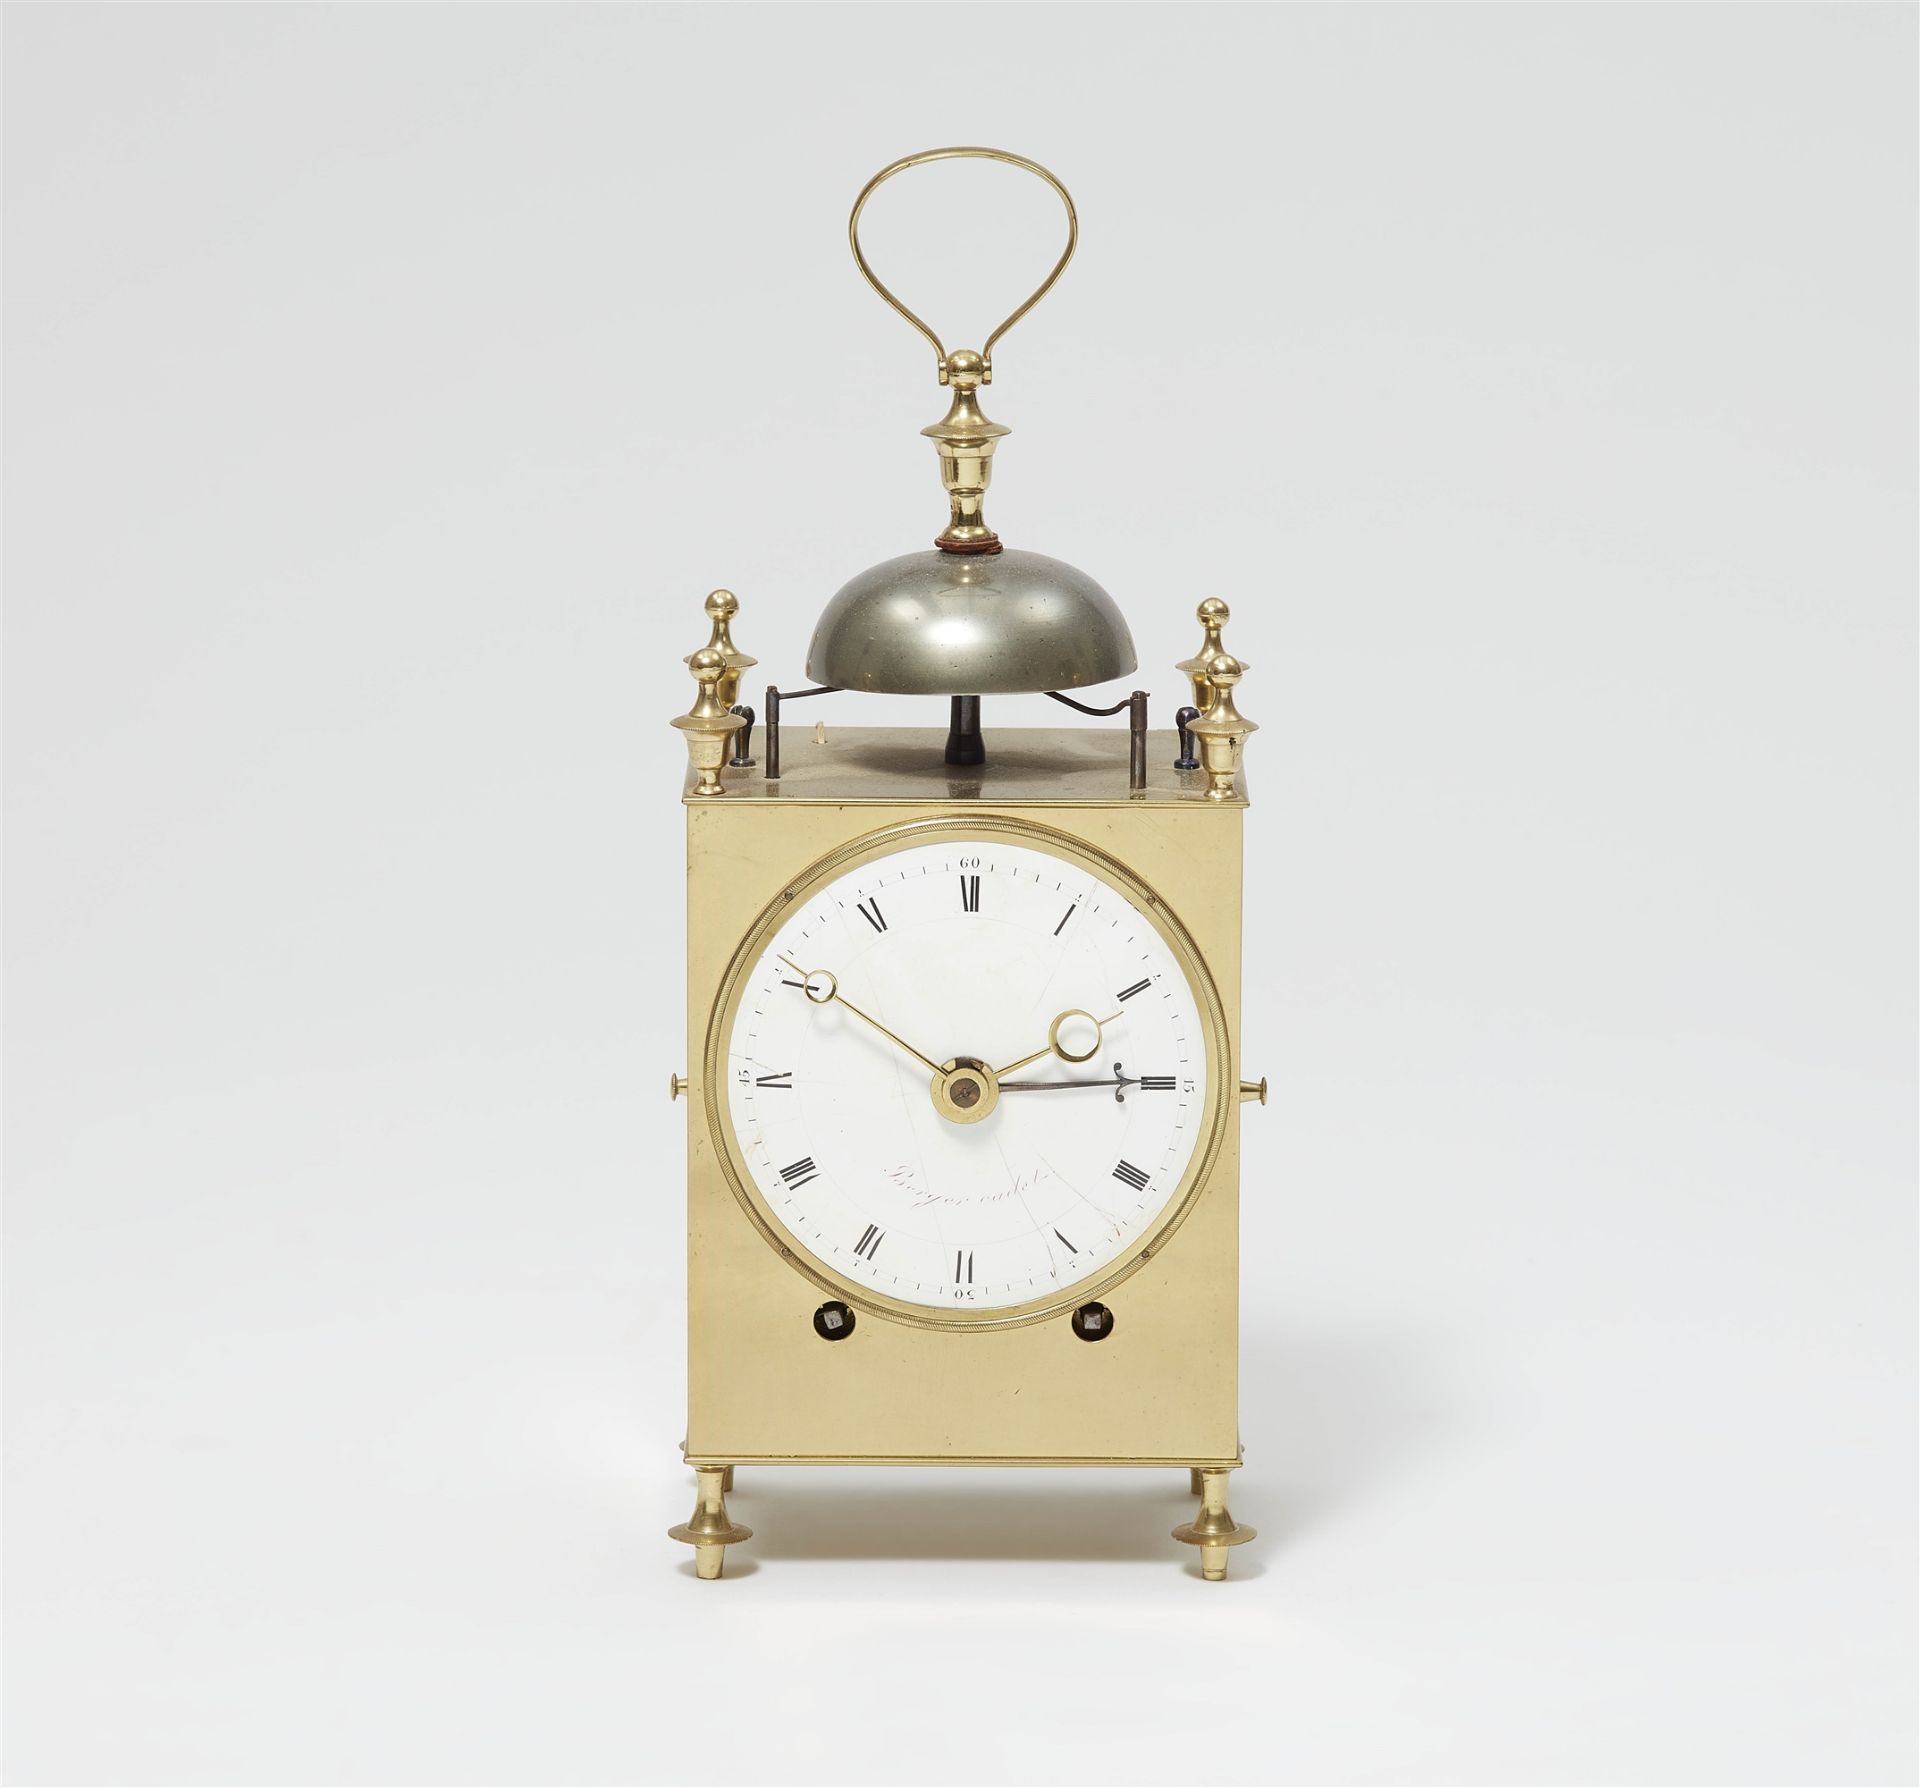 A French capucine clock with alarm